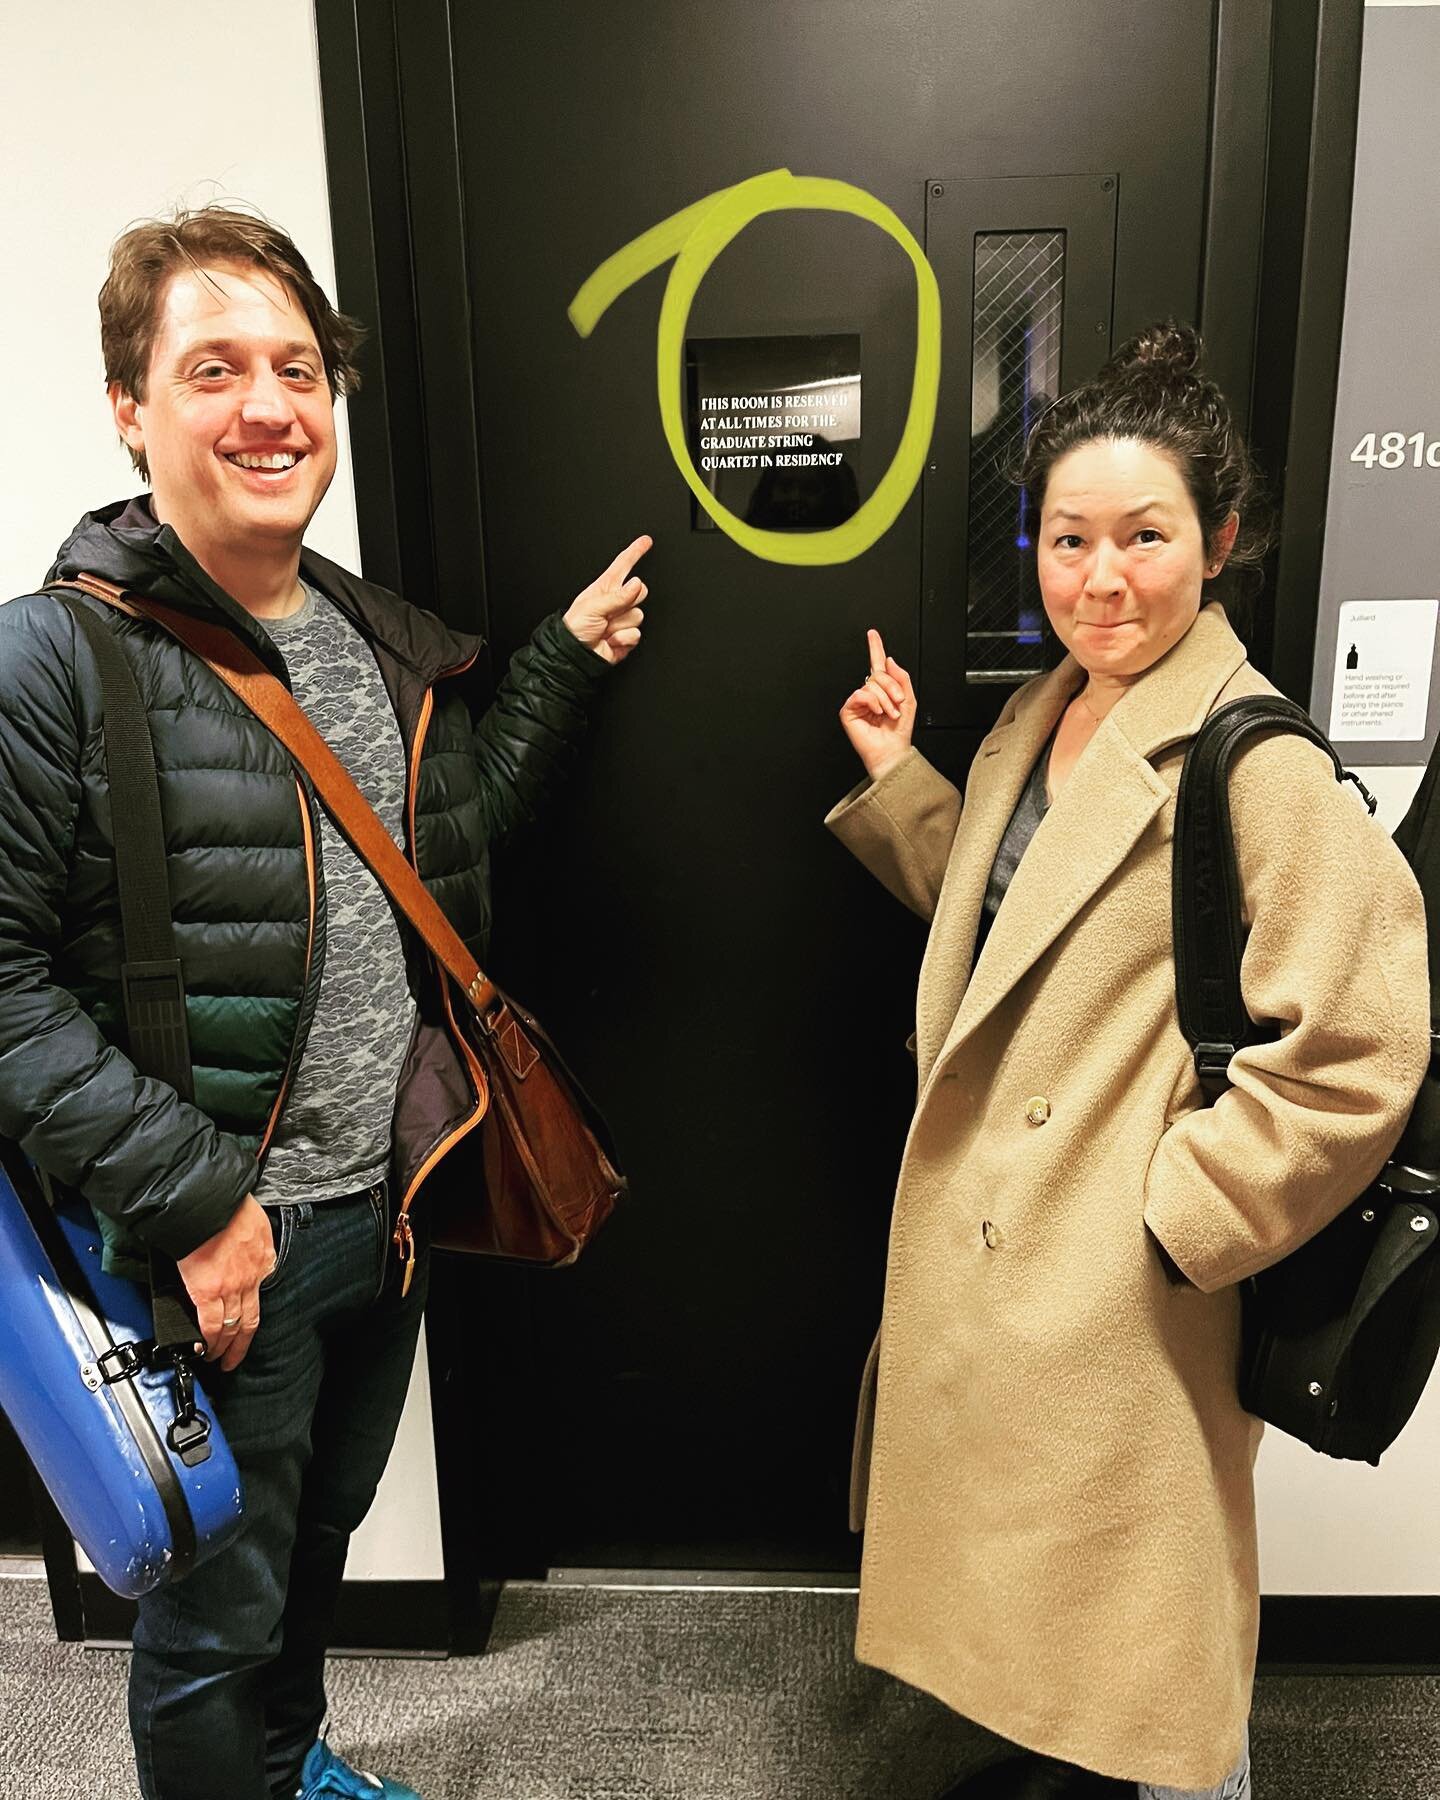 Back at our old stomping grounds&hellip;reliving the good times at our old @juilliardschool rehearsal studio 🎵🎸